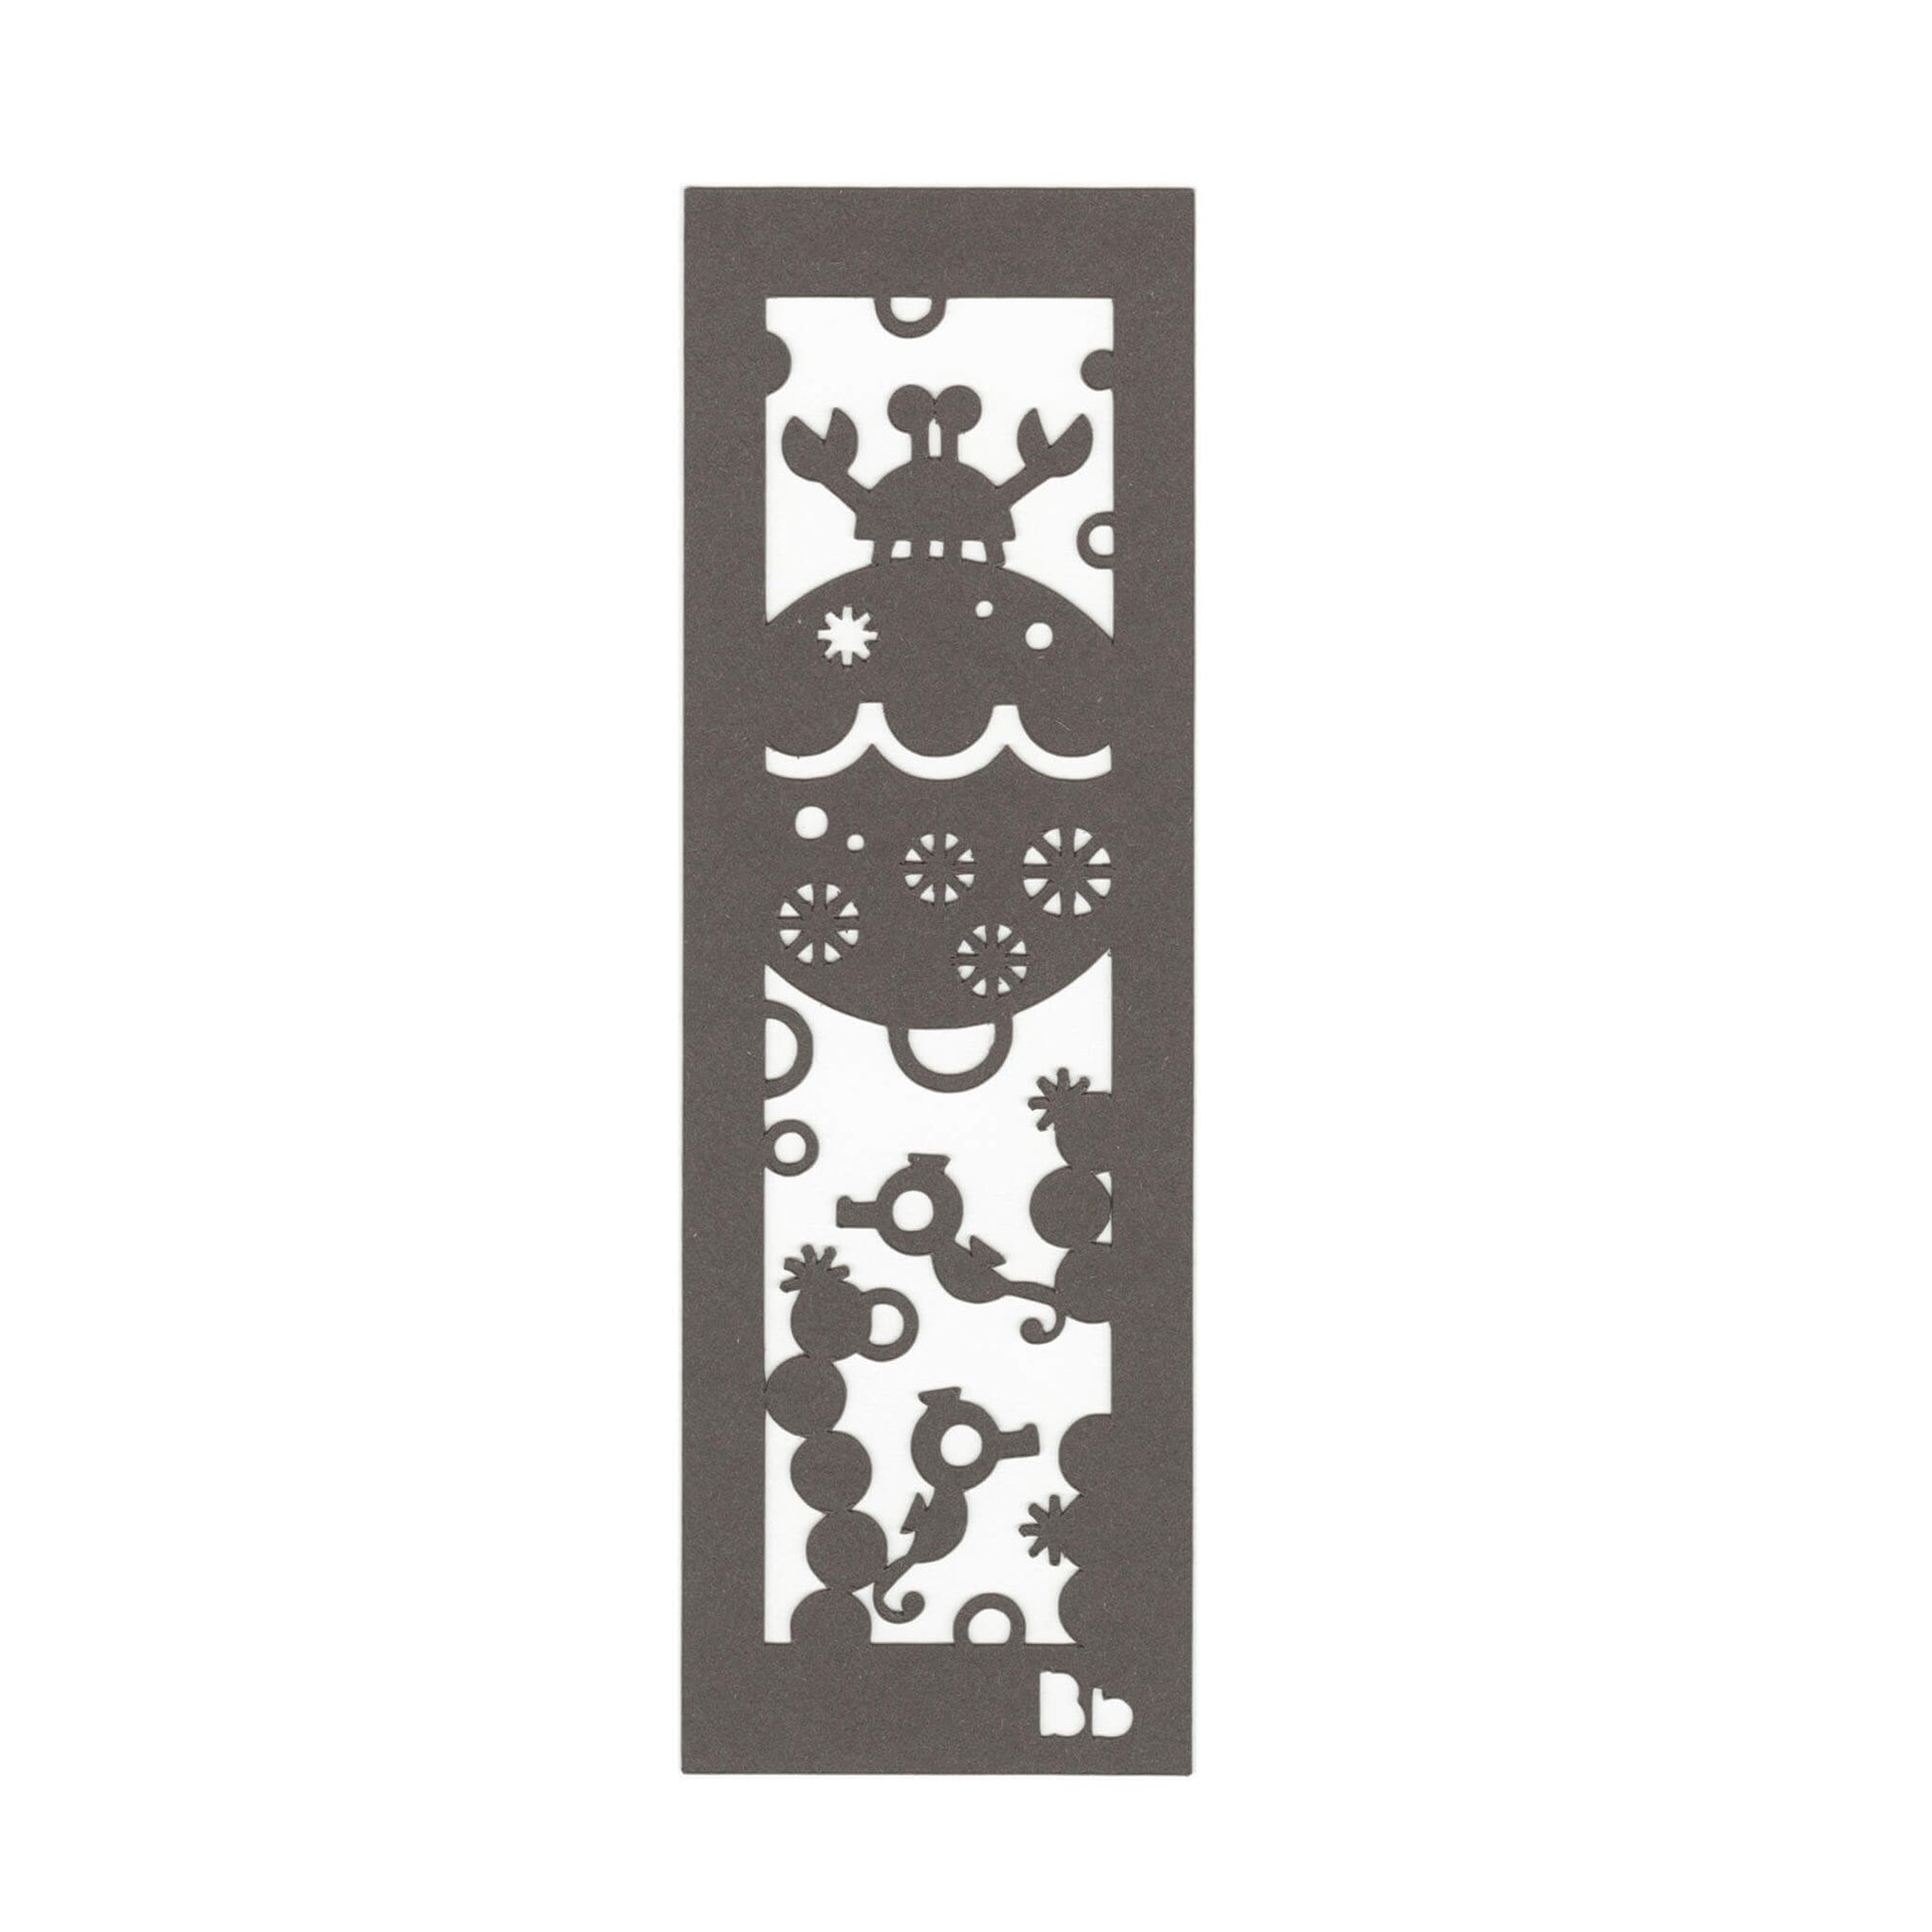 A dark brown paper bookmark with cut-outs of a crab, seahorses, coral and bubbles on a white background.